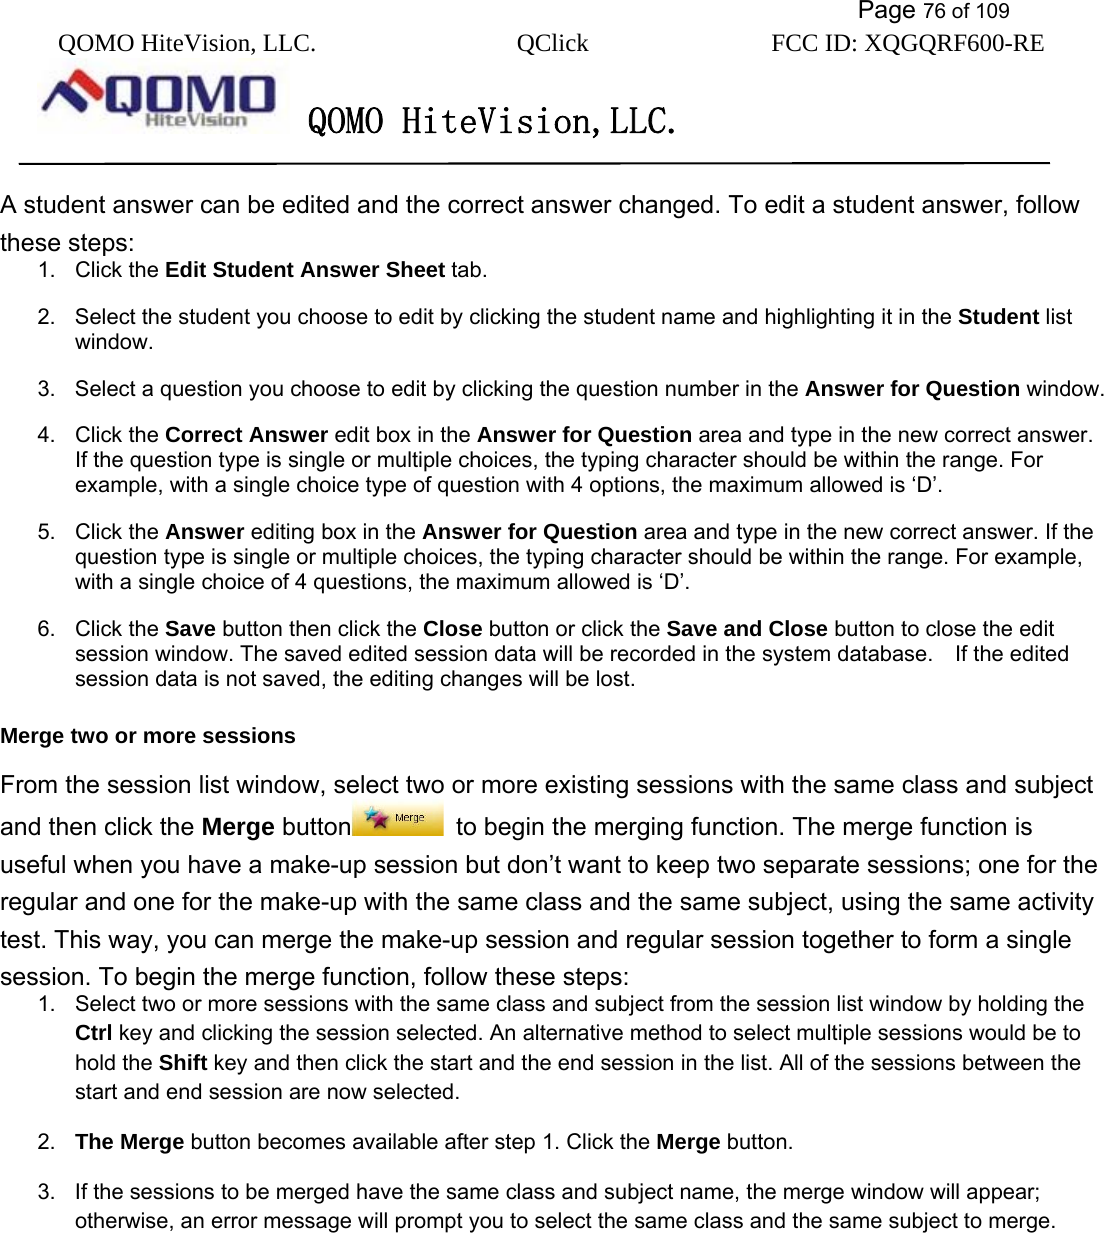           Page 76 of 109 QOMO HiteVision, LLC.  QClick        FCC ID: XQGQRF600-RE     QOMO HiteVision,LLC.   A student answer can be edited and the correct answer changed. To edit a student answer, follow these steps: 1. Click the Edit Student Answer Sheet tab. 2.  Select the student you choose to edit by clicking the student name and highlighting it in the Student list window. 3.  Select a question you choose to edit by clicking the question number in the Answer for Question window. 4. Click the Correct Answer edit box in the Answer for Question area and type in the new correct answer. If the question type is single or multiple choices, the typing character should be within the range. For example, with a single choice type of question with 4 options, the maximum allowed is ‘D’. 5. Click the Answer editing box in the Answer for Question area and type in the new correct answer. If the question type is single or multiple choices, the typing character should be within the range. For example, with a single choice of 4 questions, the maximum allowed is ‘D’. 6. Click the Save button then click the Close button or click the Save and Close button to close the edit session window. The saved edited session data will be recorded in the system database.  If the edited session data is not saved, the editing changes will be lost. Merge two or more sessions From the session list window, select two or more existing sessions with the same class and subject and then click the Merge button   to begin the merging function. The merge function is useful when you have a make-up session but don’t want to keep two separate sessions; one for the regular and one for the make-up with the same class and the same subject, using the same activity test. This way, you can merge the make-up session and regular session together to form a single session. To begin the merge function, follow these steps: 1.  Select two or more sessions with the same class and subject from the session list window by holding the Ctrl key and clicking the session selected. An alternative method to select multiple sessions would be to hold the Shift key and then click the start and the end session in the list. All of the sessions between the start and end session are now selected. 2.  The Merge button becomes available after step 1. Click the Merge button. 3.  If the sessions to be merged have the same class and subject name, the merge window will appear; otherwise, an error message will prompt you to select the same class and the same subject to merge.  